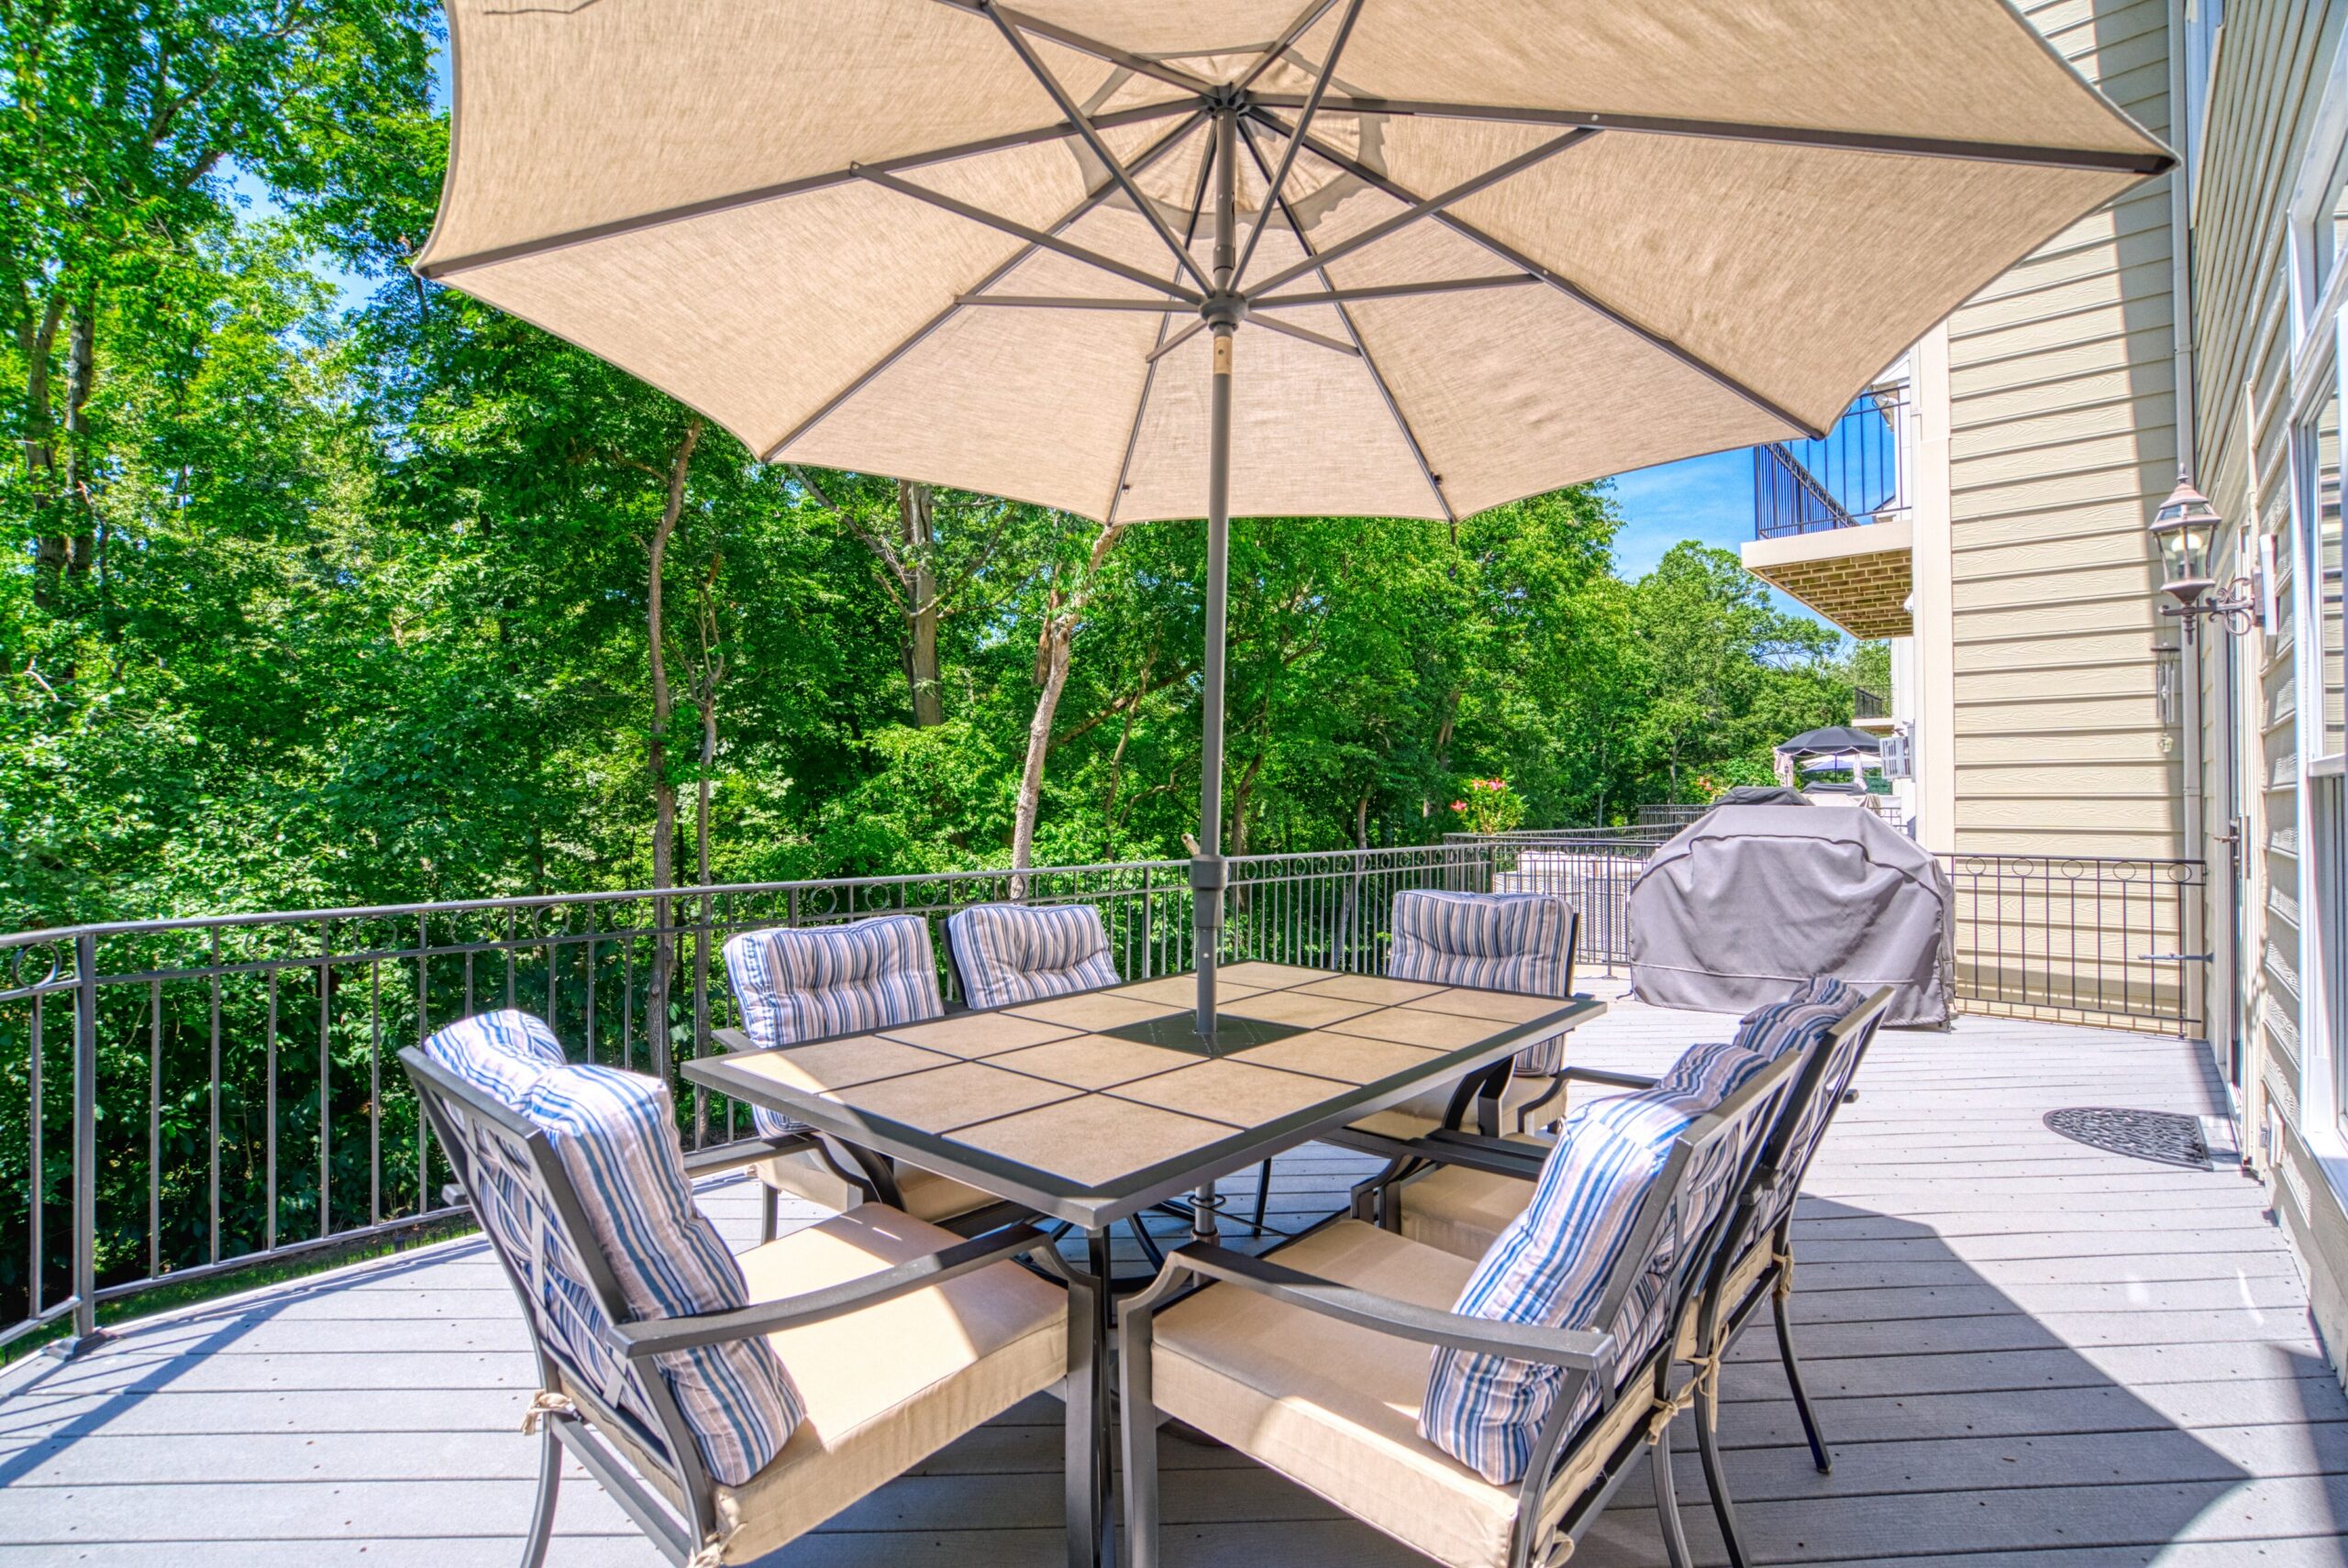 Large deck on main floor of 3-story townhome with large patio furniture and umbrella on a sunny day